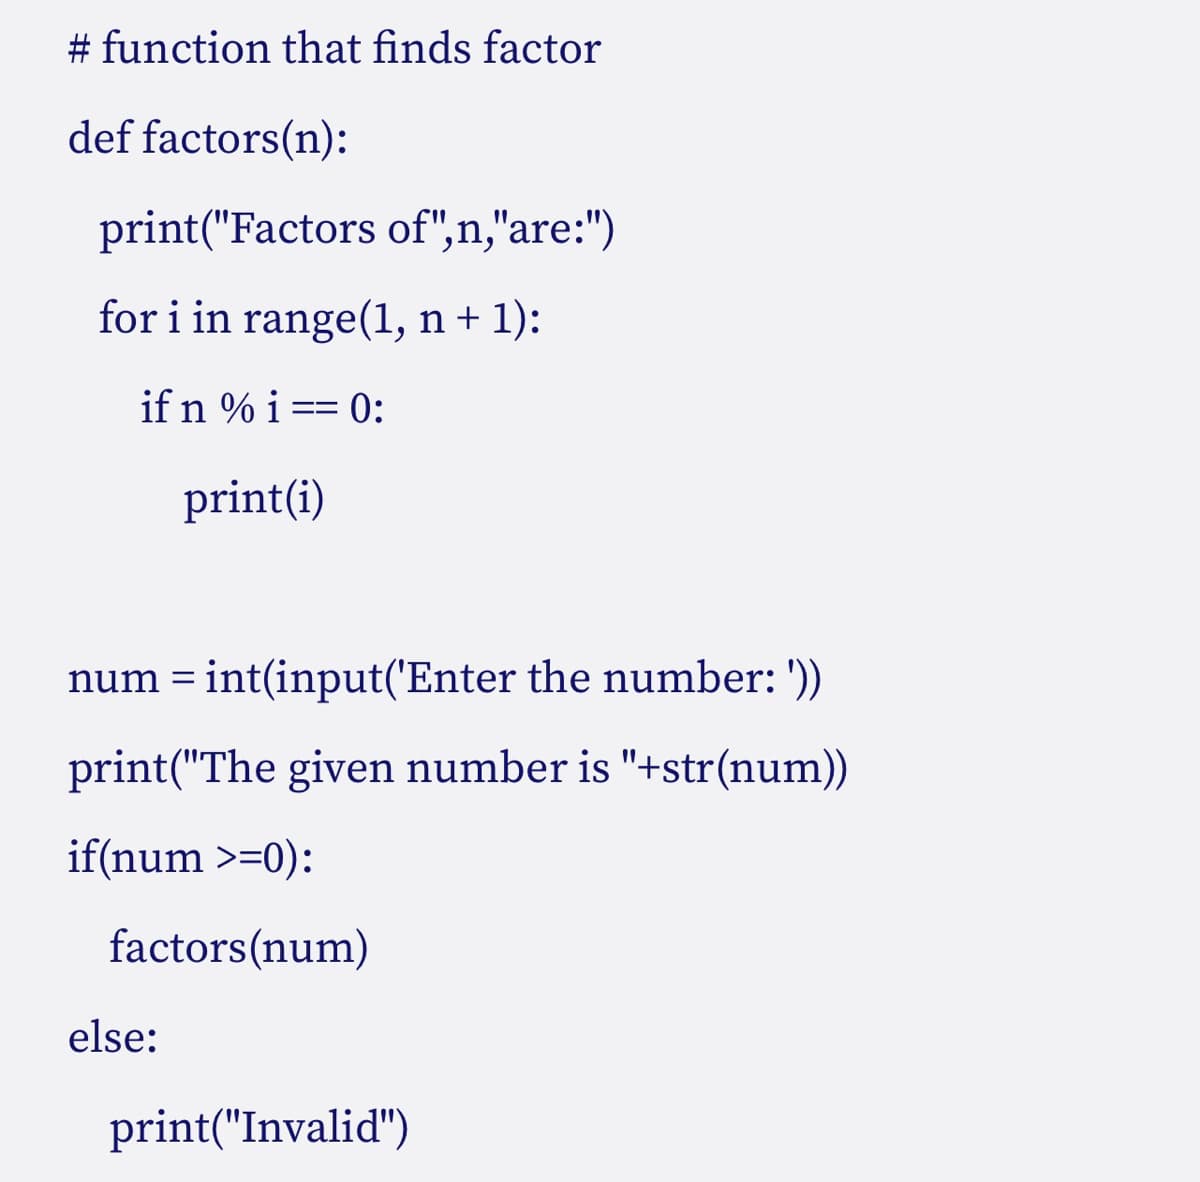 # function that finds factor
def
factors(n):
print("Factors of",n,"are:")
for i in range(1, n + 1):
if n % i == 0:
print(i)
num = int(input('Enter the number: '))
print("The given number is "+str(num))
if(num >=0):
factors(num)
else:
print("Invalid")